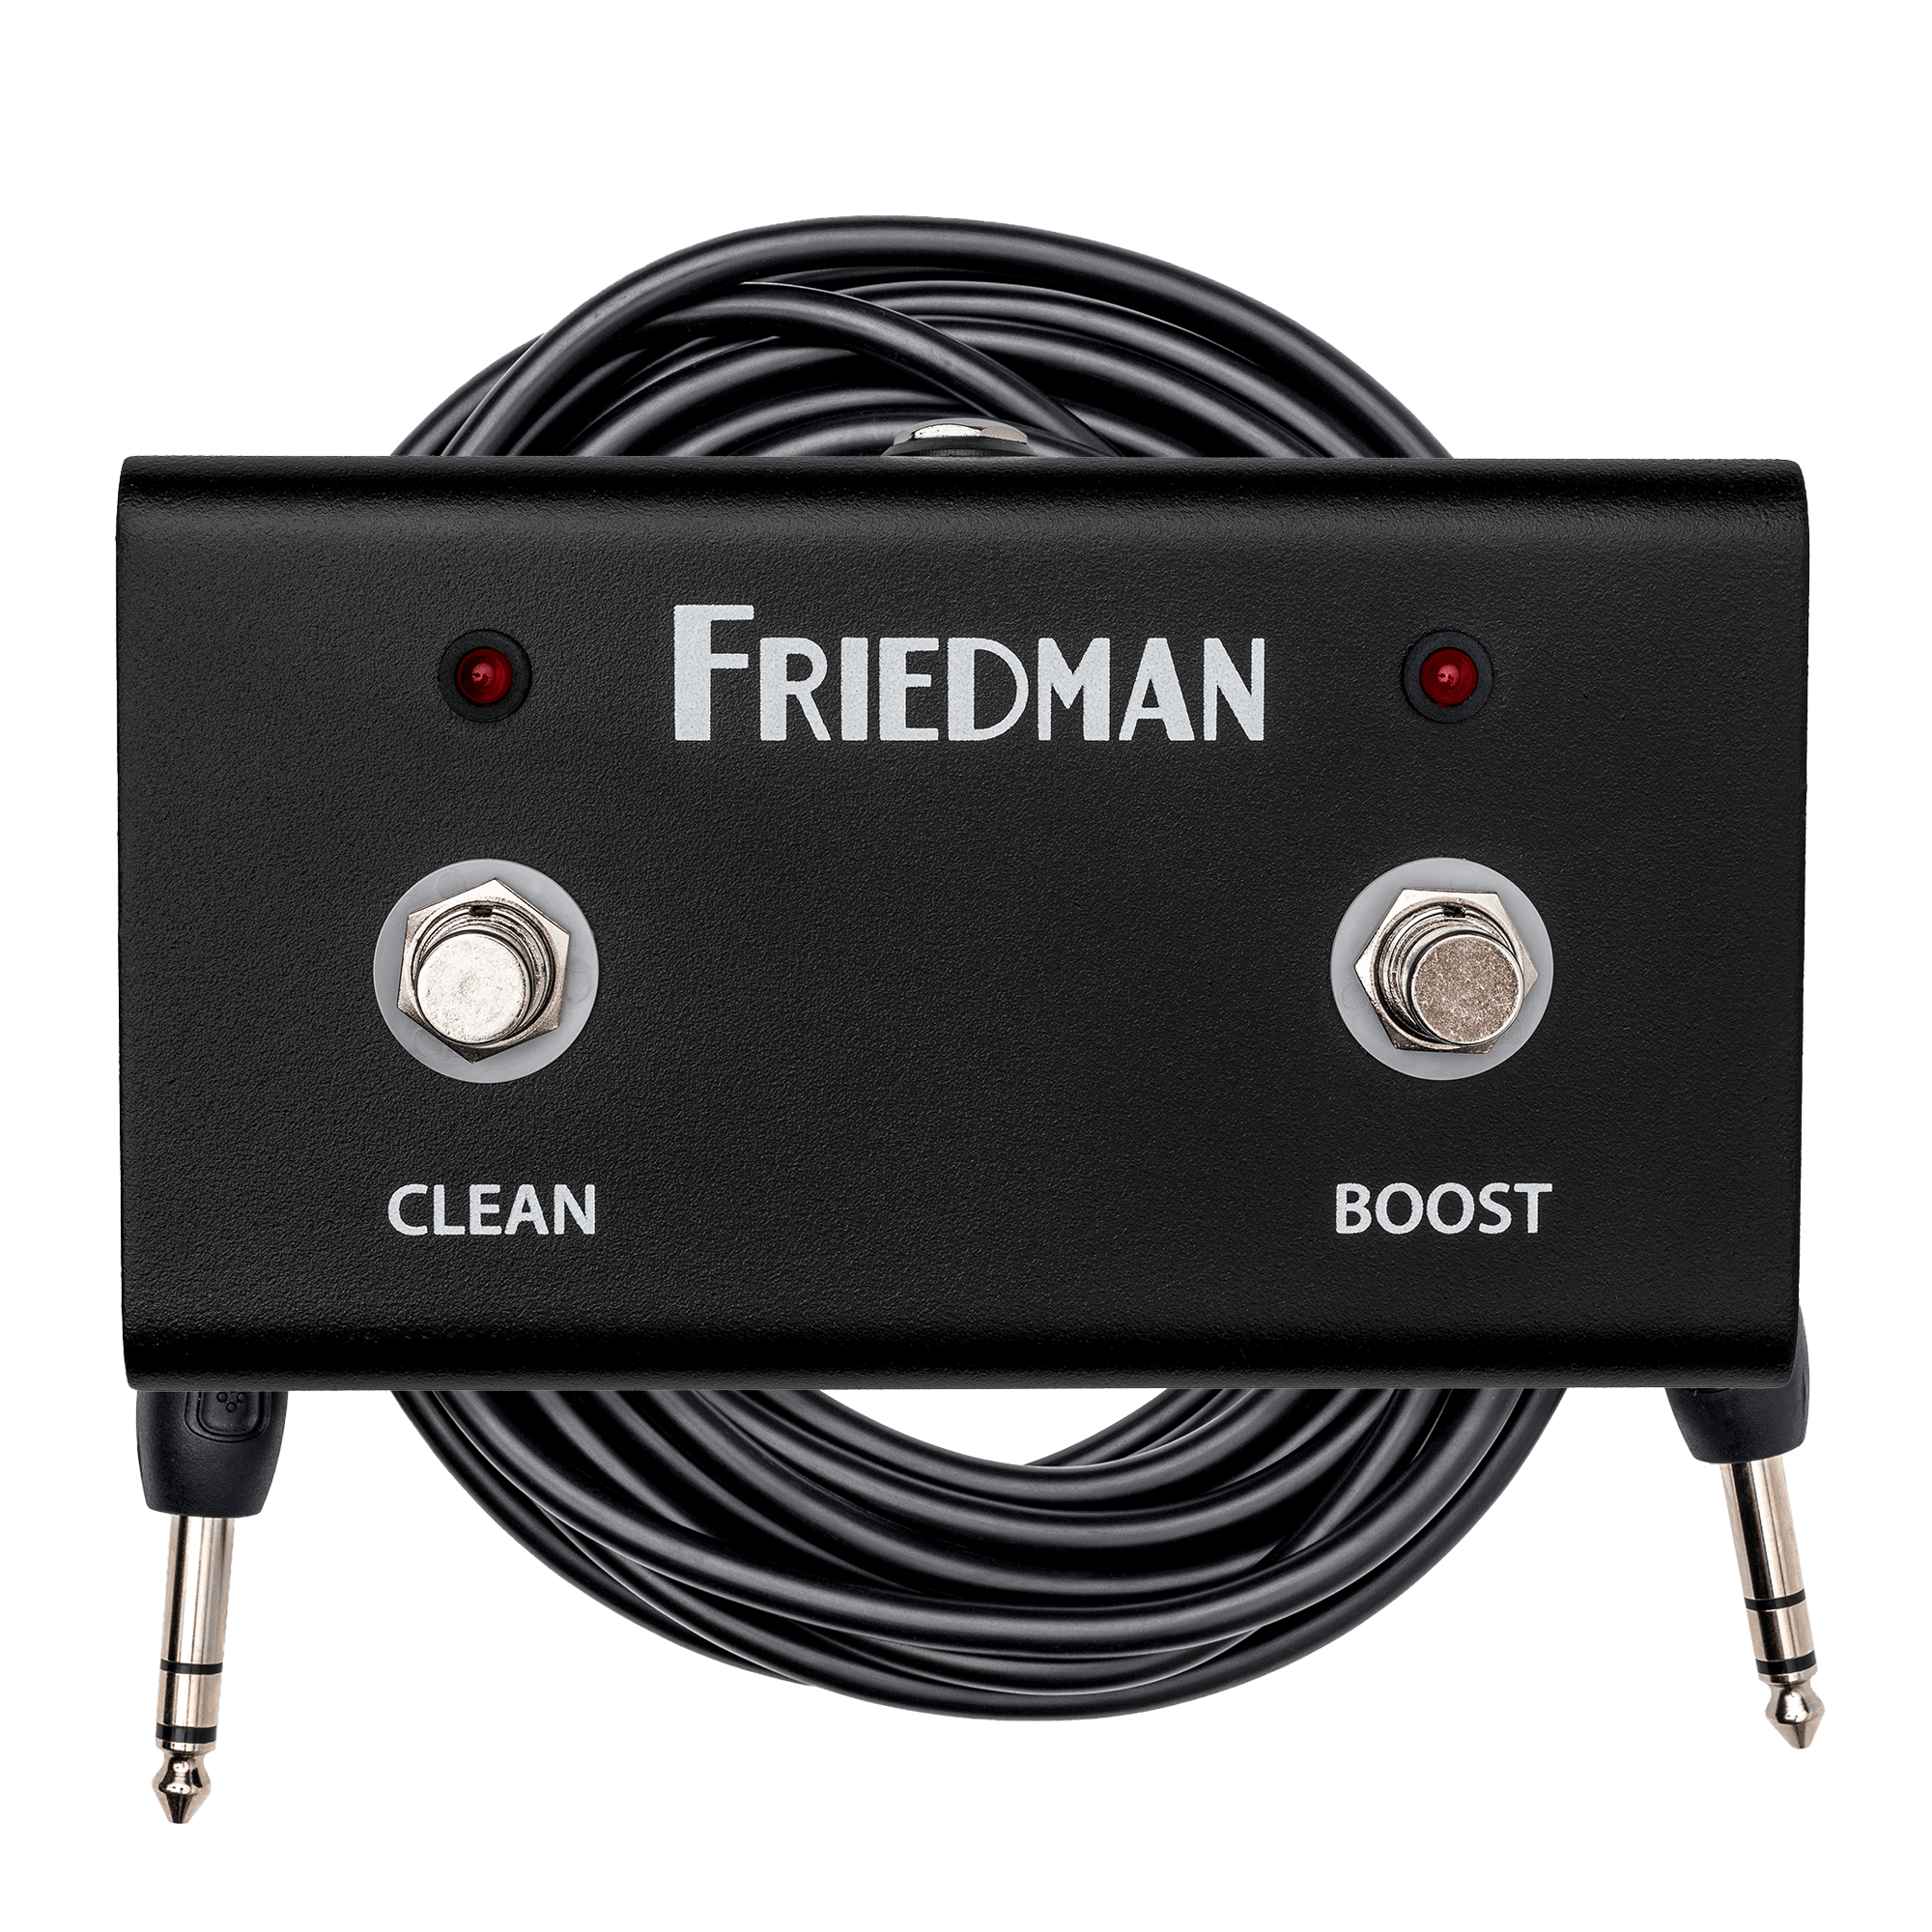 Friedman Dual Button Footswitch and Cable